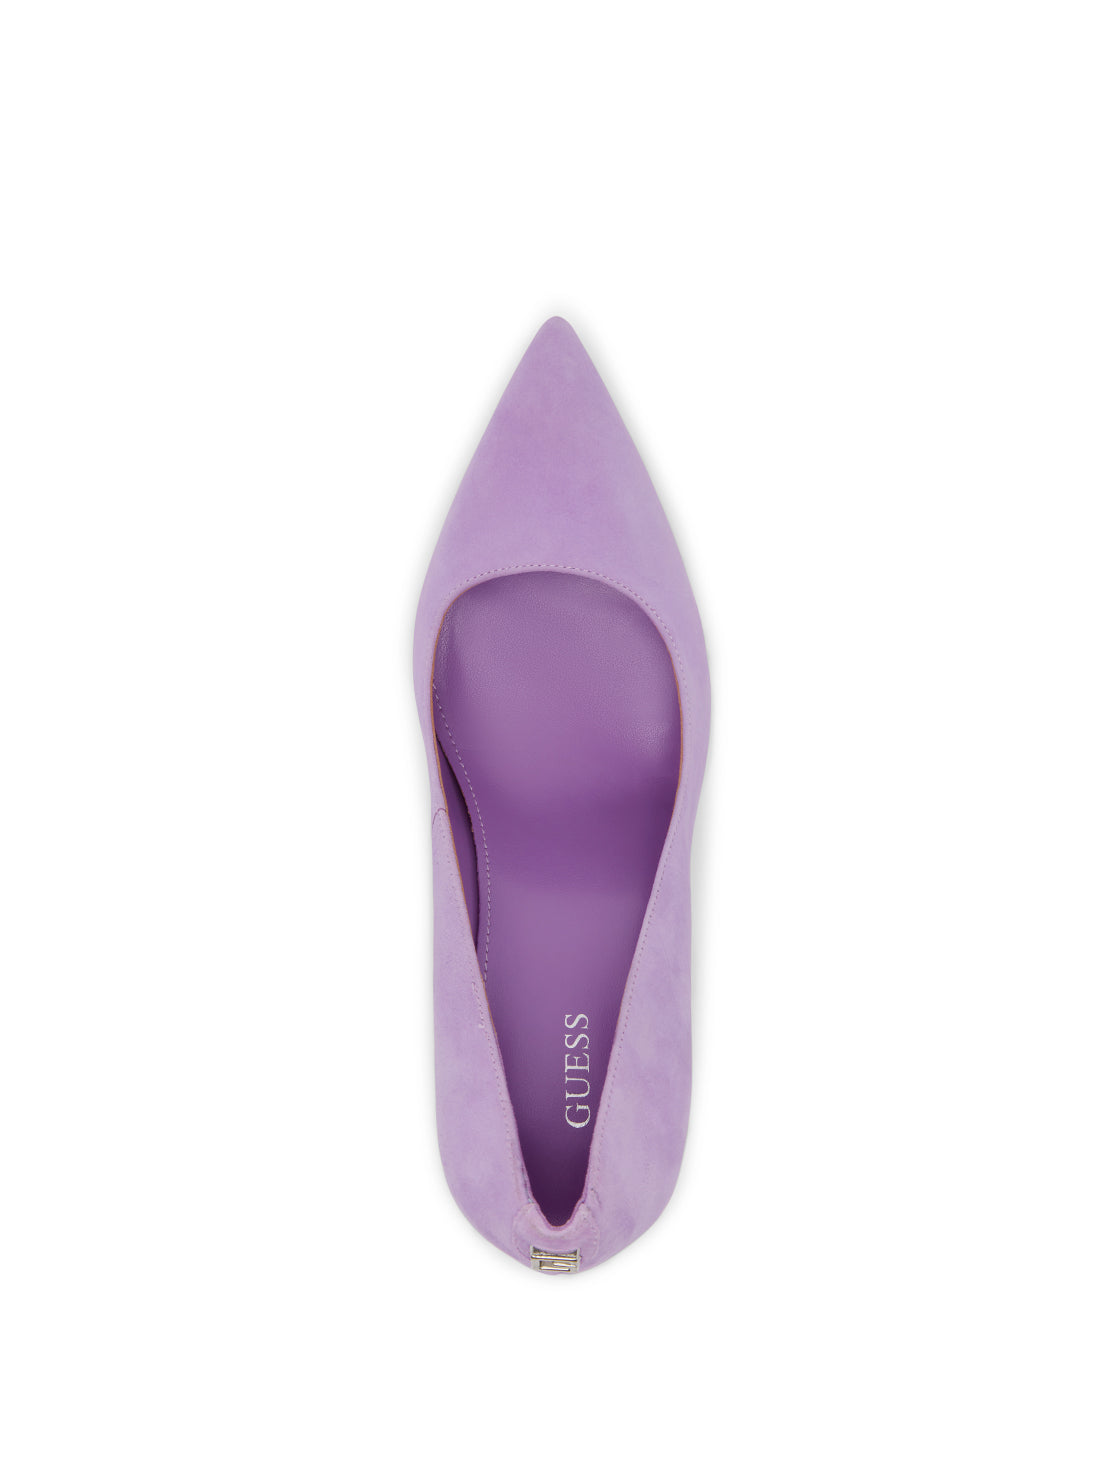 GUESS Women's Purple Abagail Suede Pumps ABAGAIL Top View